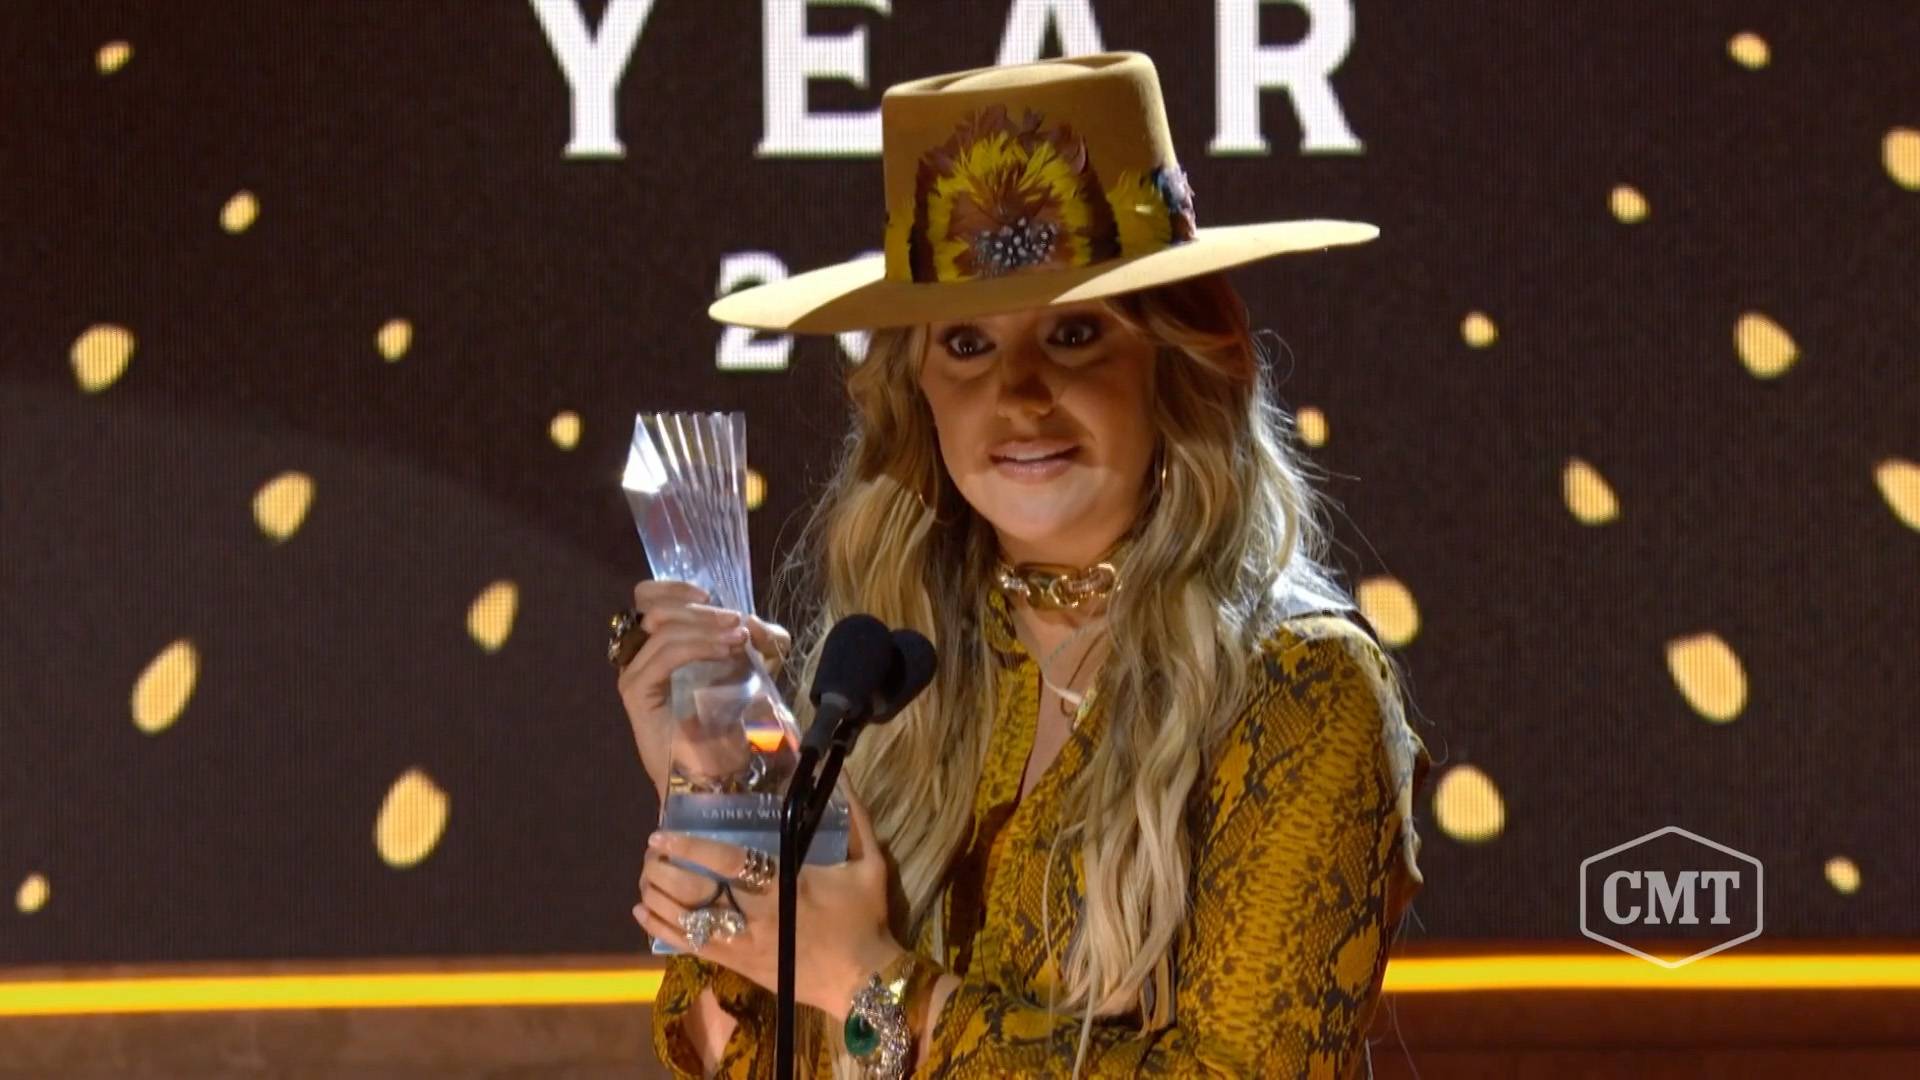 Yellowstone' Star Lainey Wilson Wore a See-Through Outfit Ahead of CMT  Awards and Fans Are Stunned